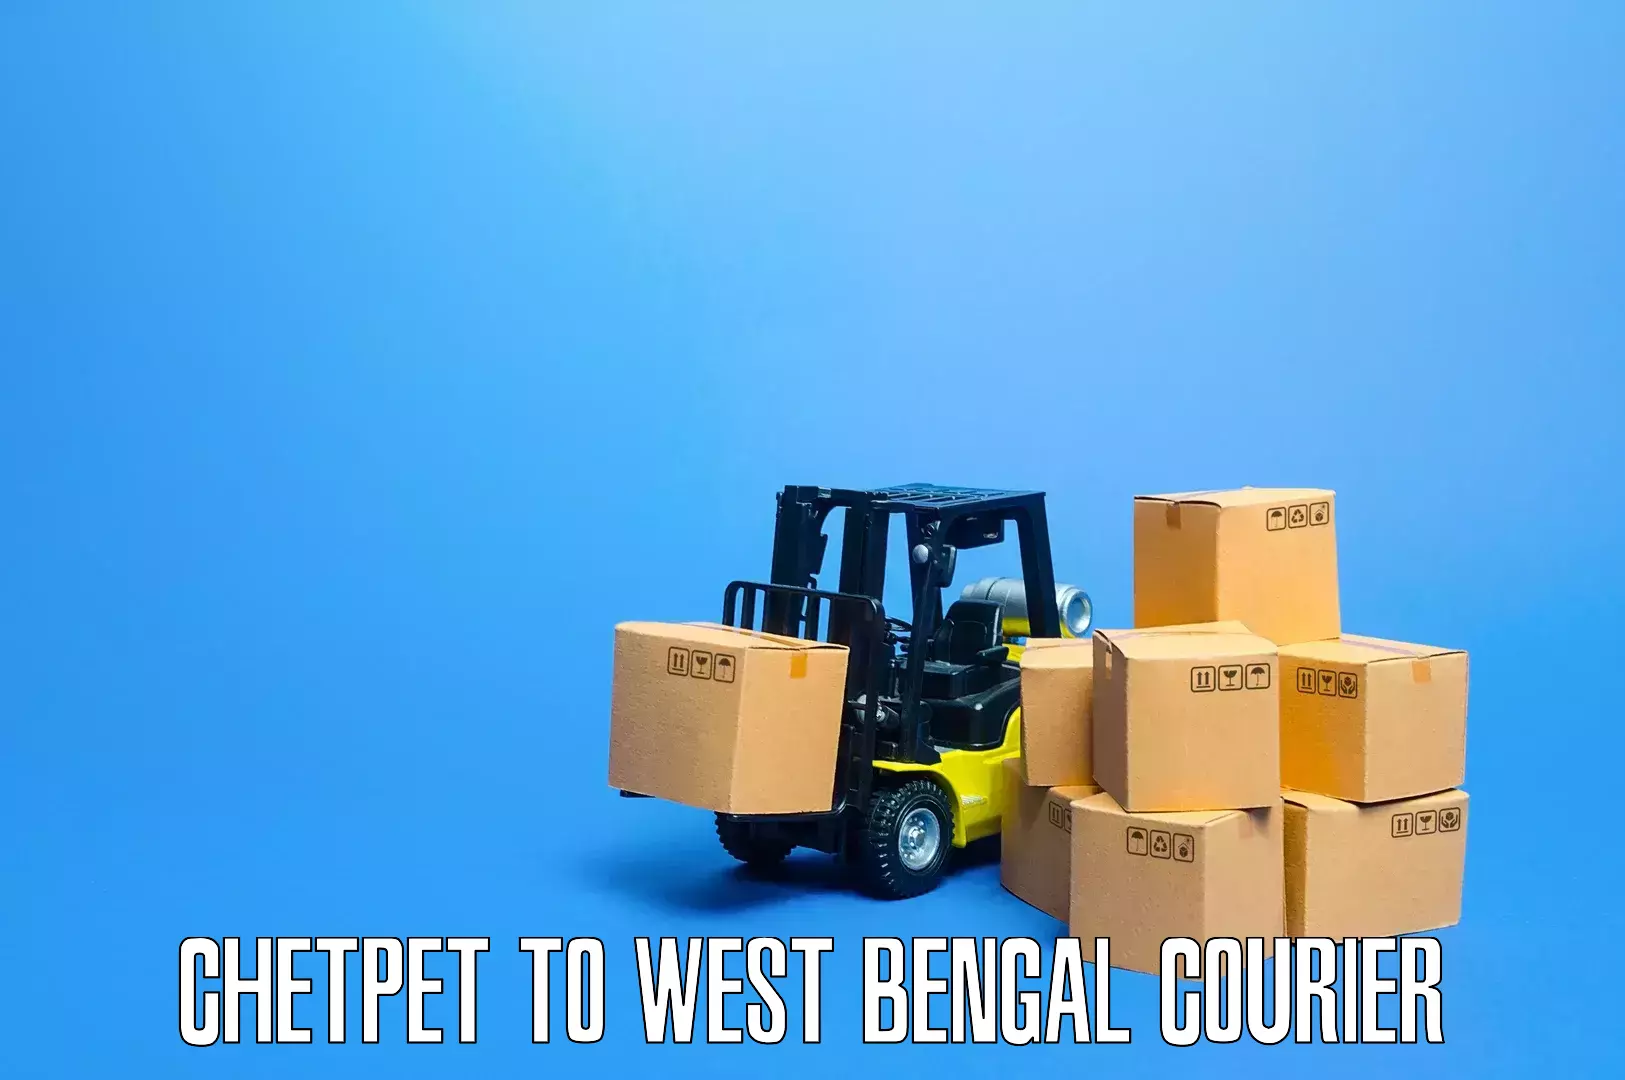 Professional home movers Chetpet to West Bengal